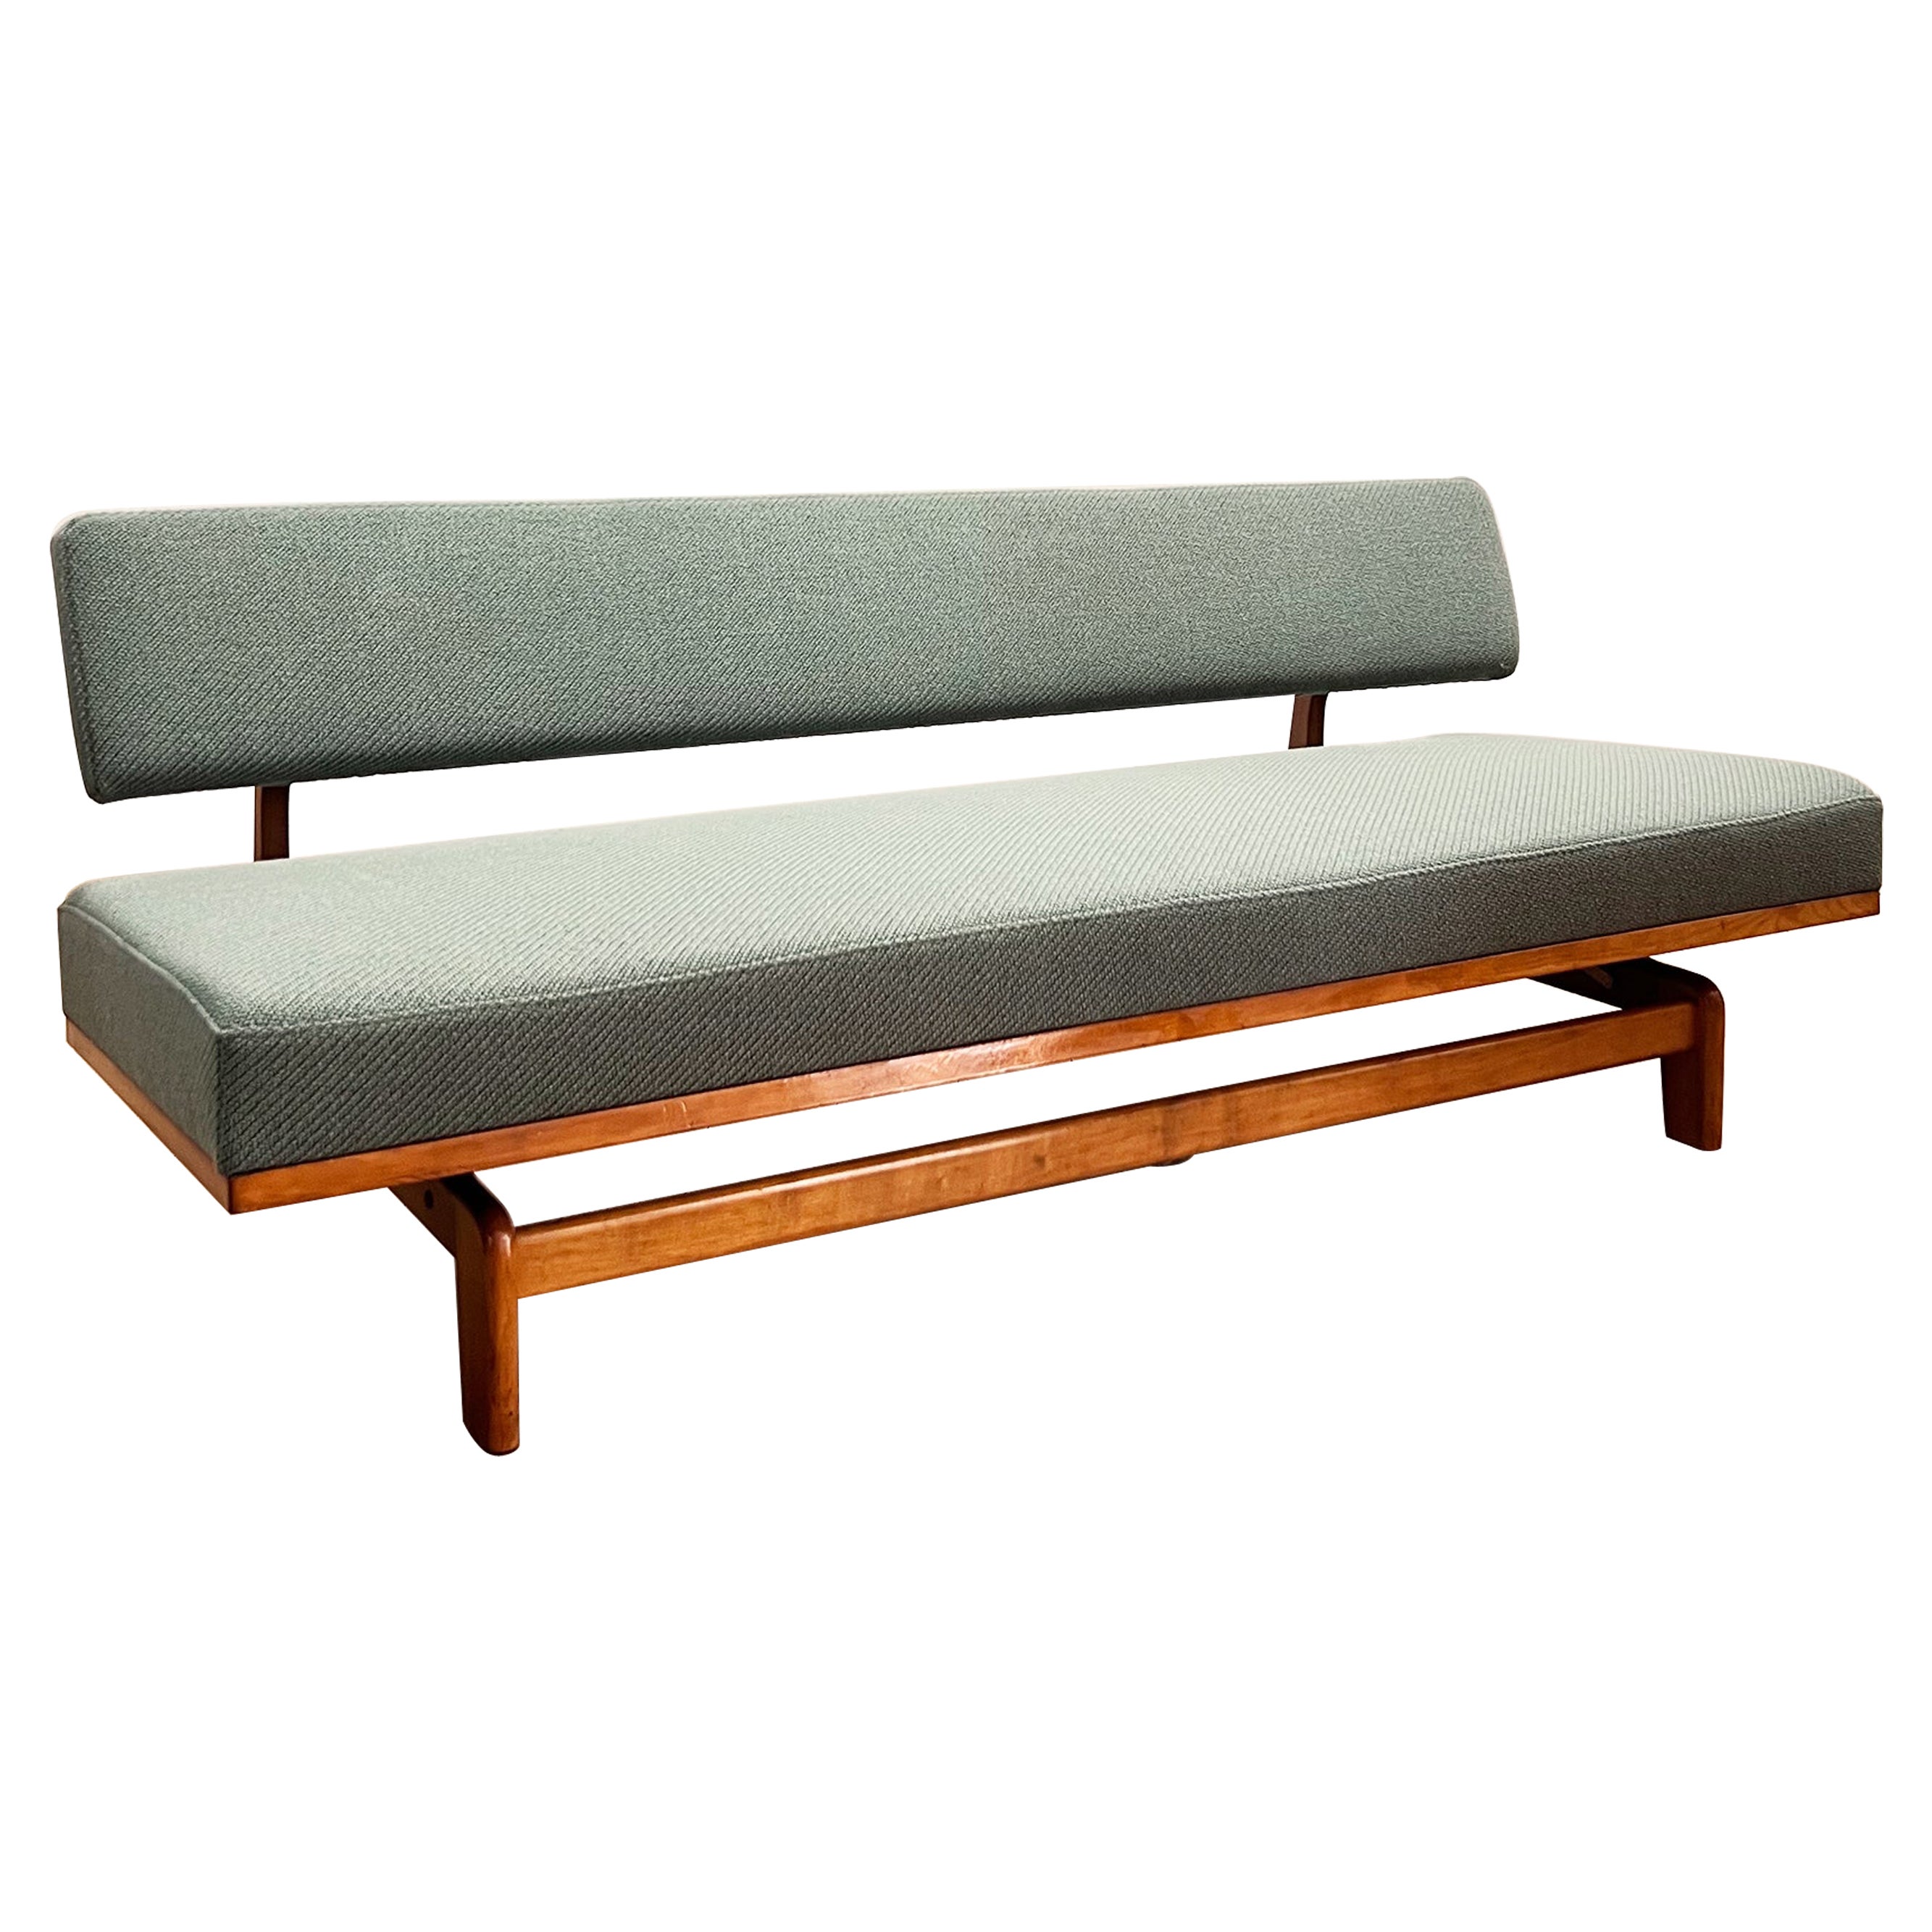 Mid-Century 3 Seat Sofa by Hans Bellmann for Wilkhahn, Germany, 1950s For Sale